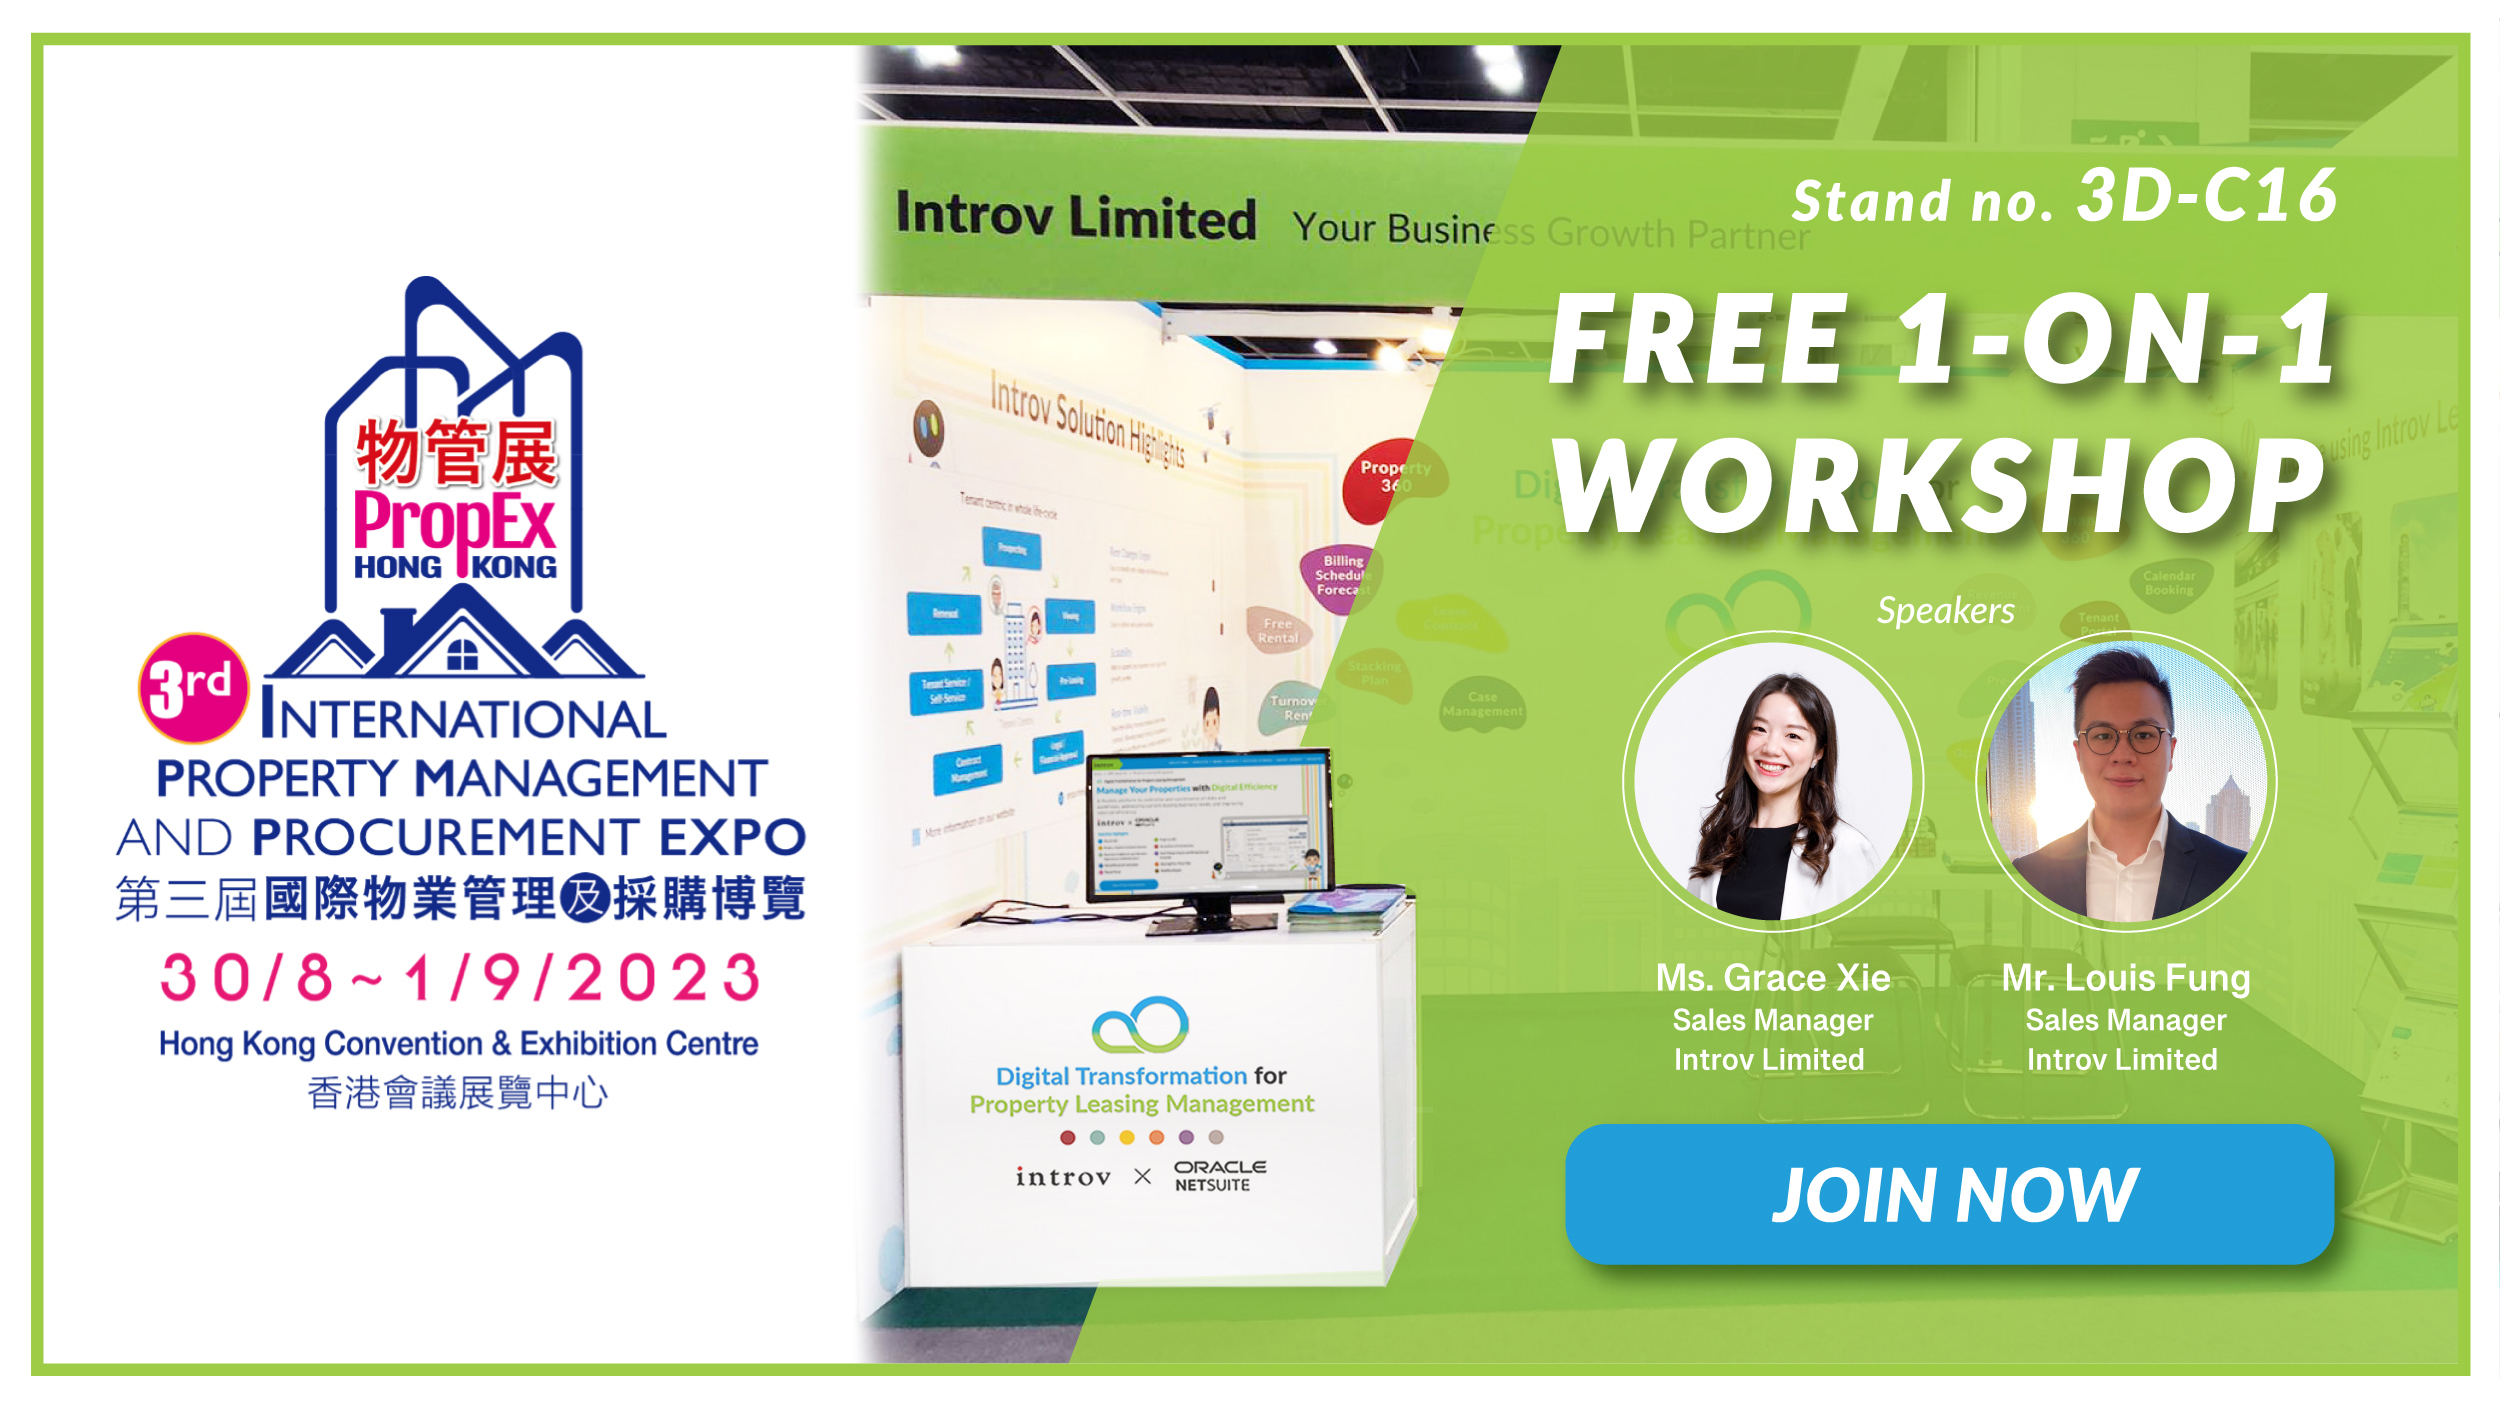 Free 1-on-1 workshop at the 3rd International Property Management & Procurement Expo (30 Aug to 1 Sep 2023)